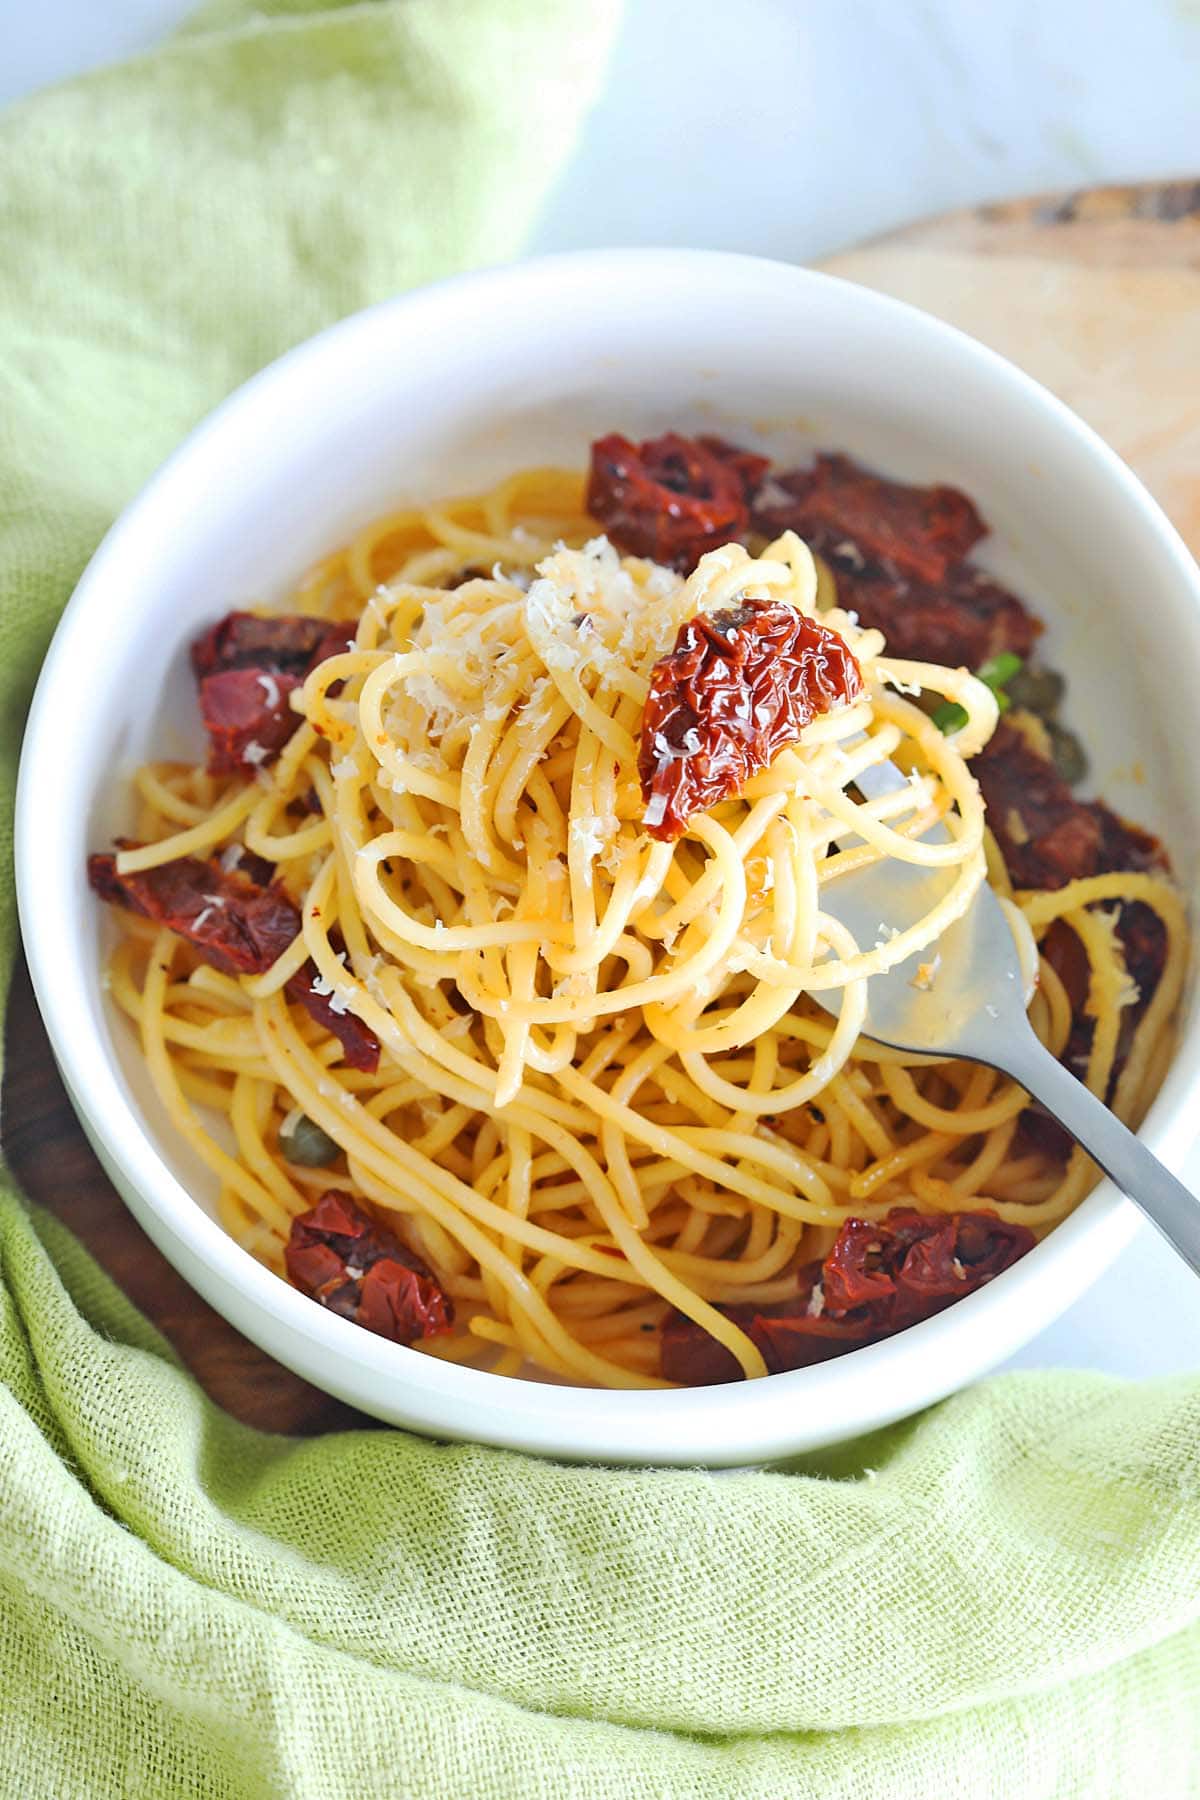 Sun dried tomatoes on top of pasta.